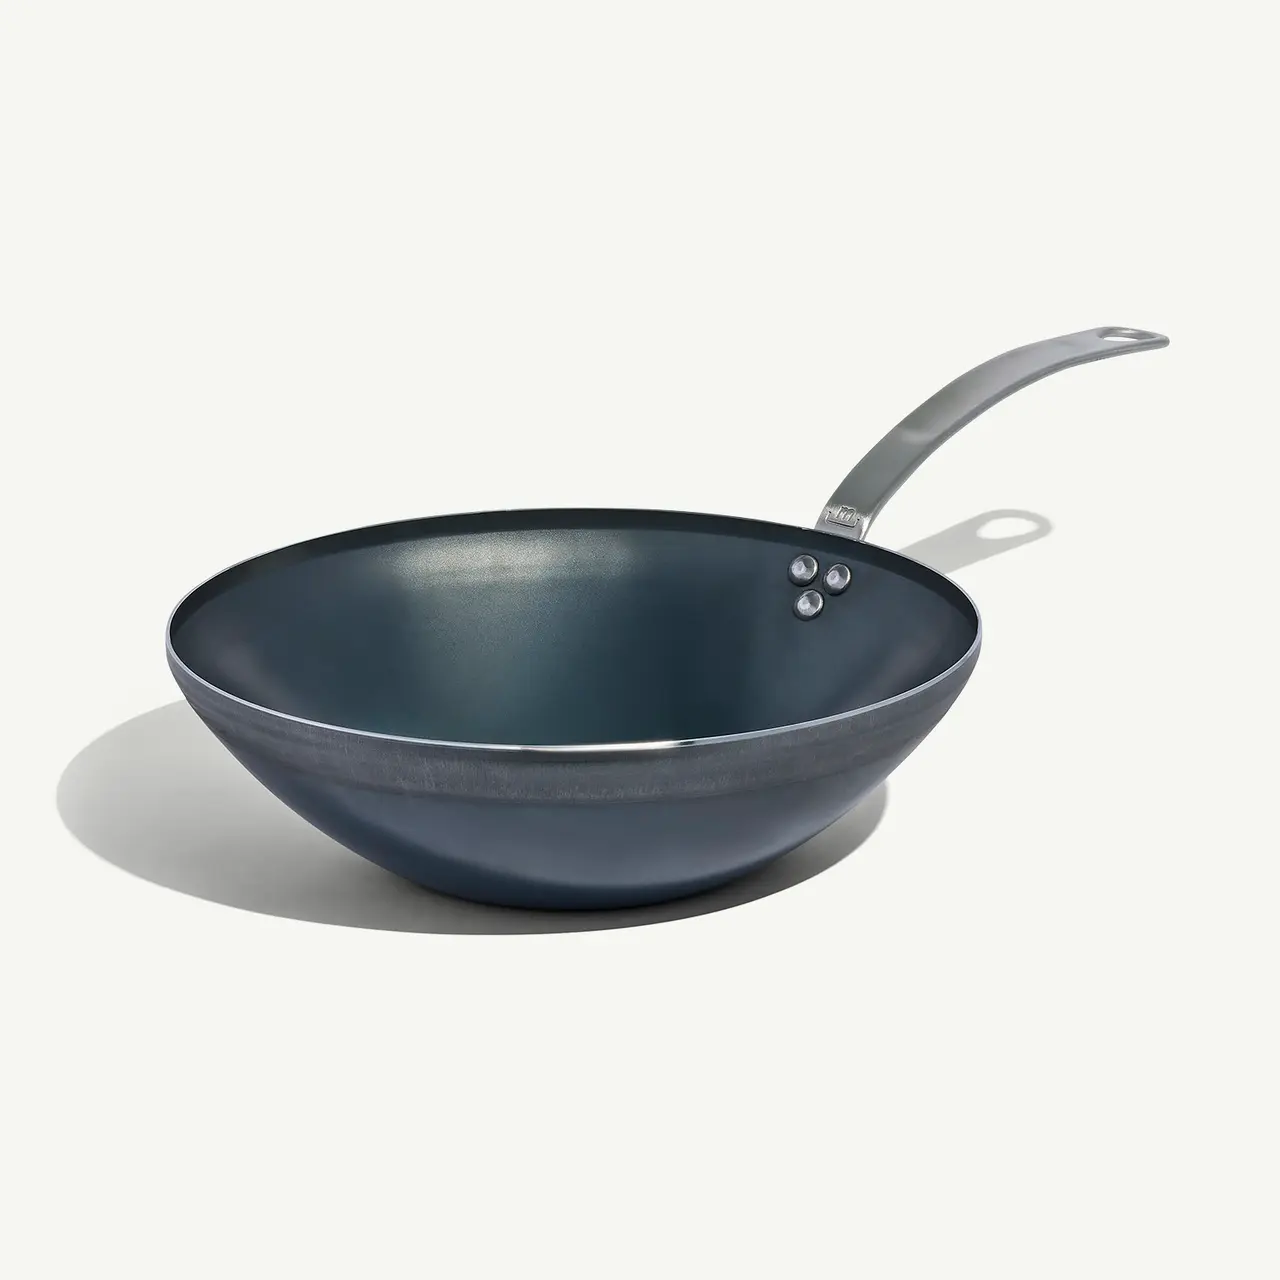 A non-stick frying pan with a silver handle is positioned against a plain background.